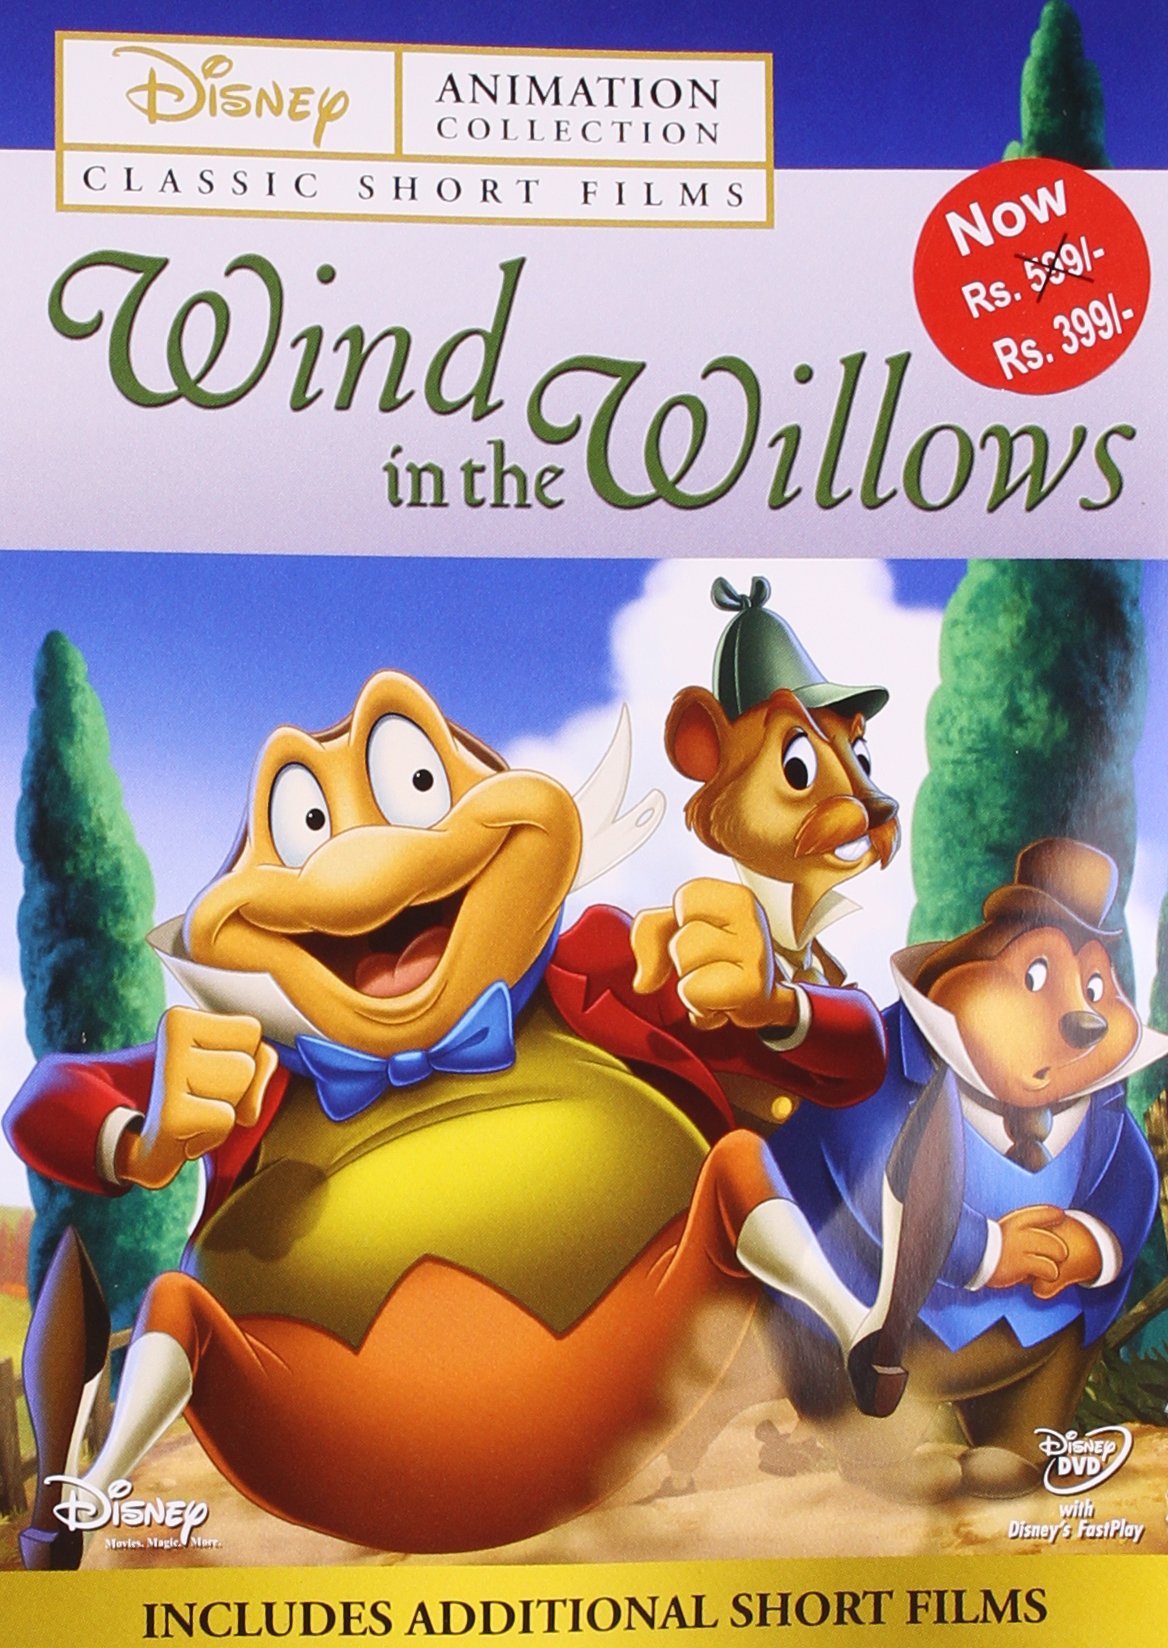 disney-animation-collection-5-wind-in-the-willows-dvd-movie-purchase